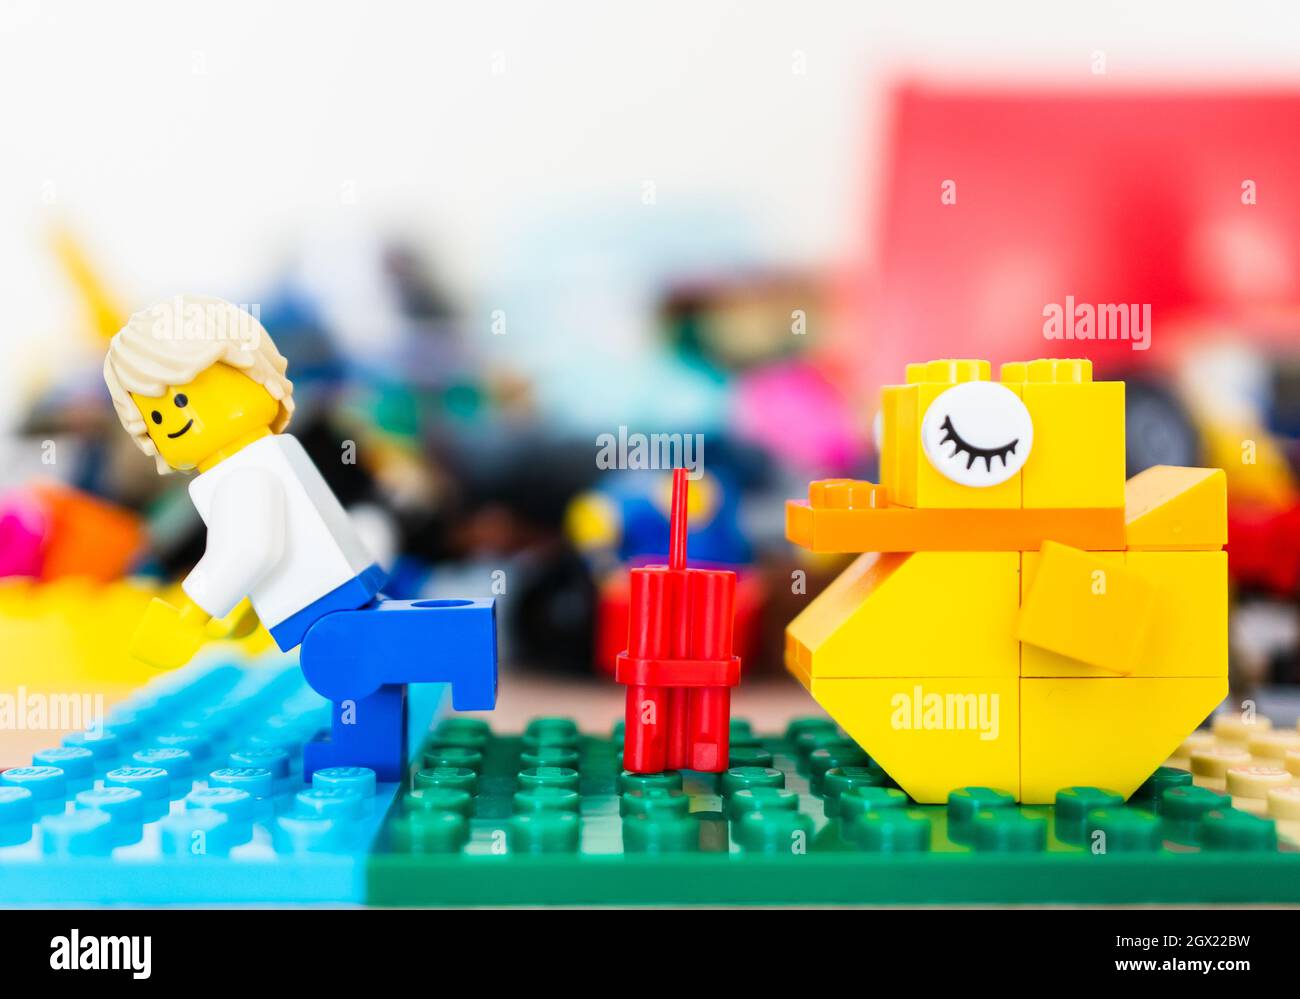 POZNAN, POLAND - Feb 15, 2019: A Lego toy of a Man running away from  dynamite placed in front of a sleeping yellow duck Stock Photo - Alamy